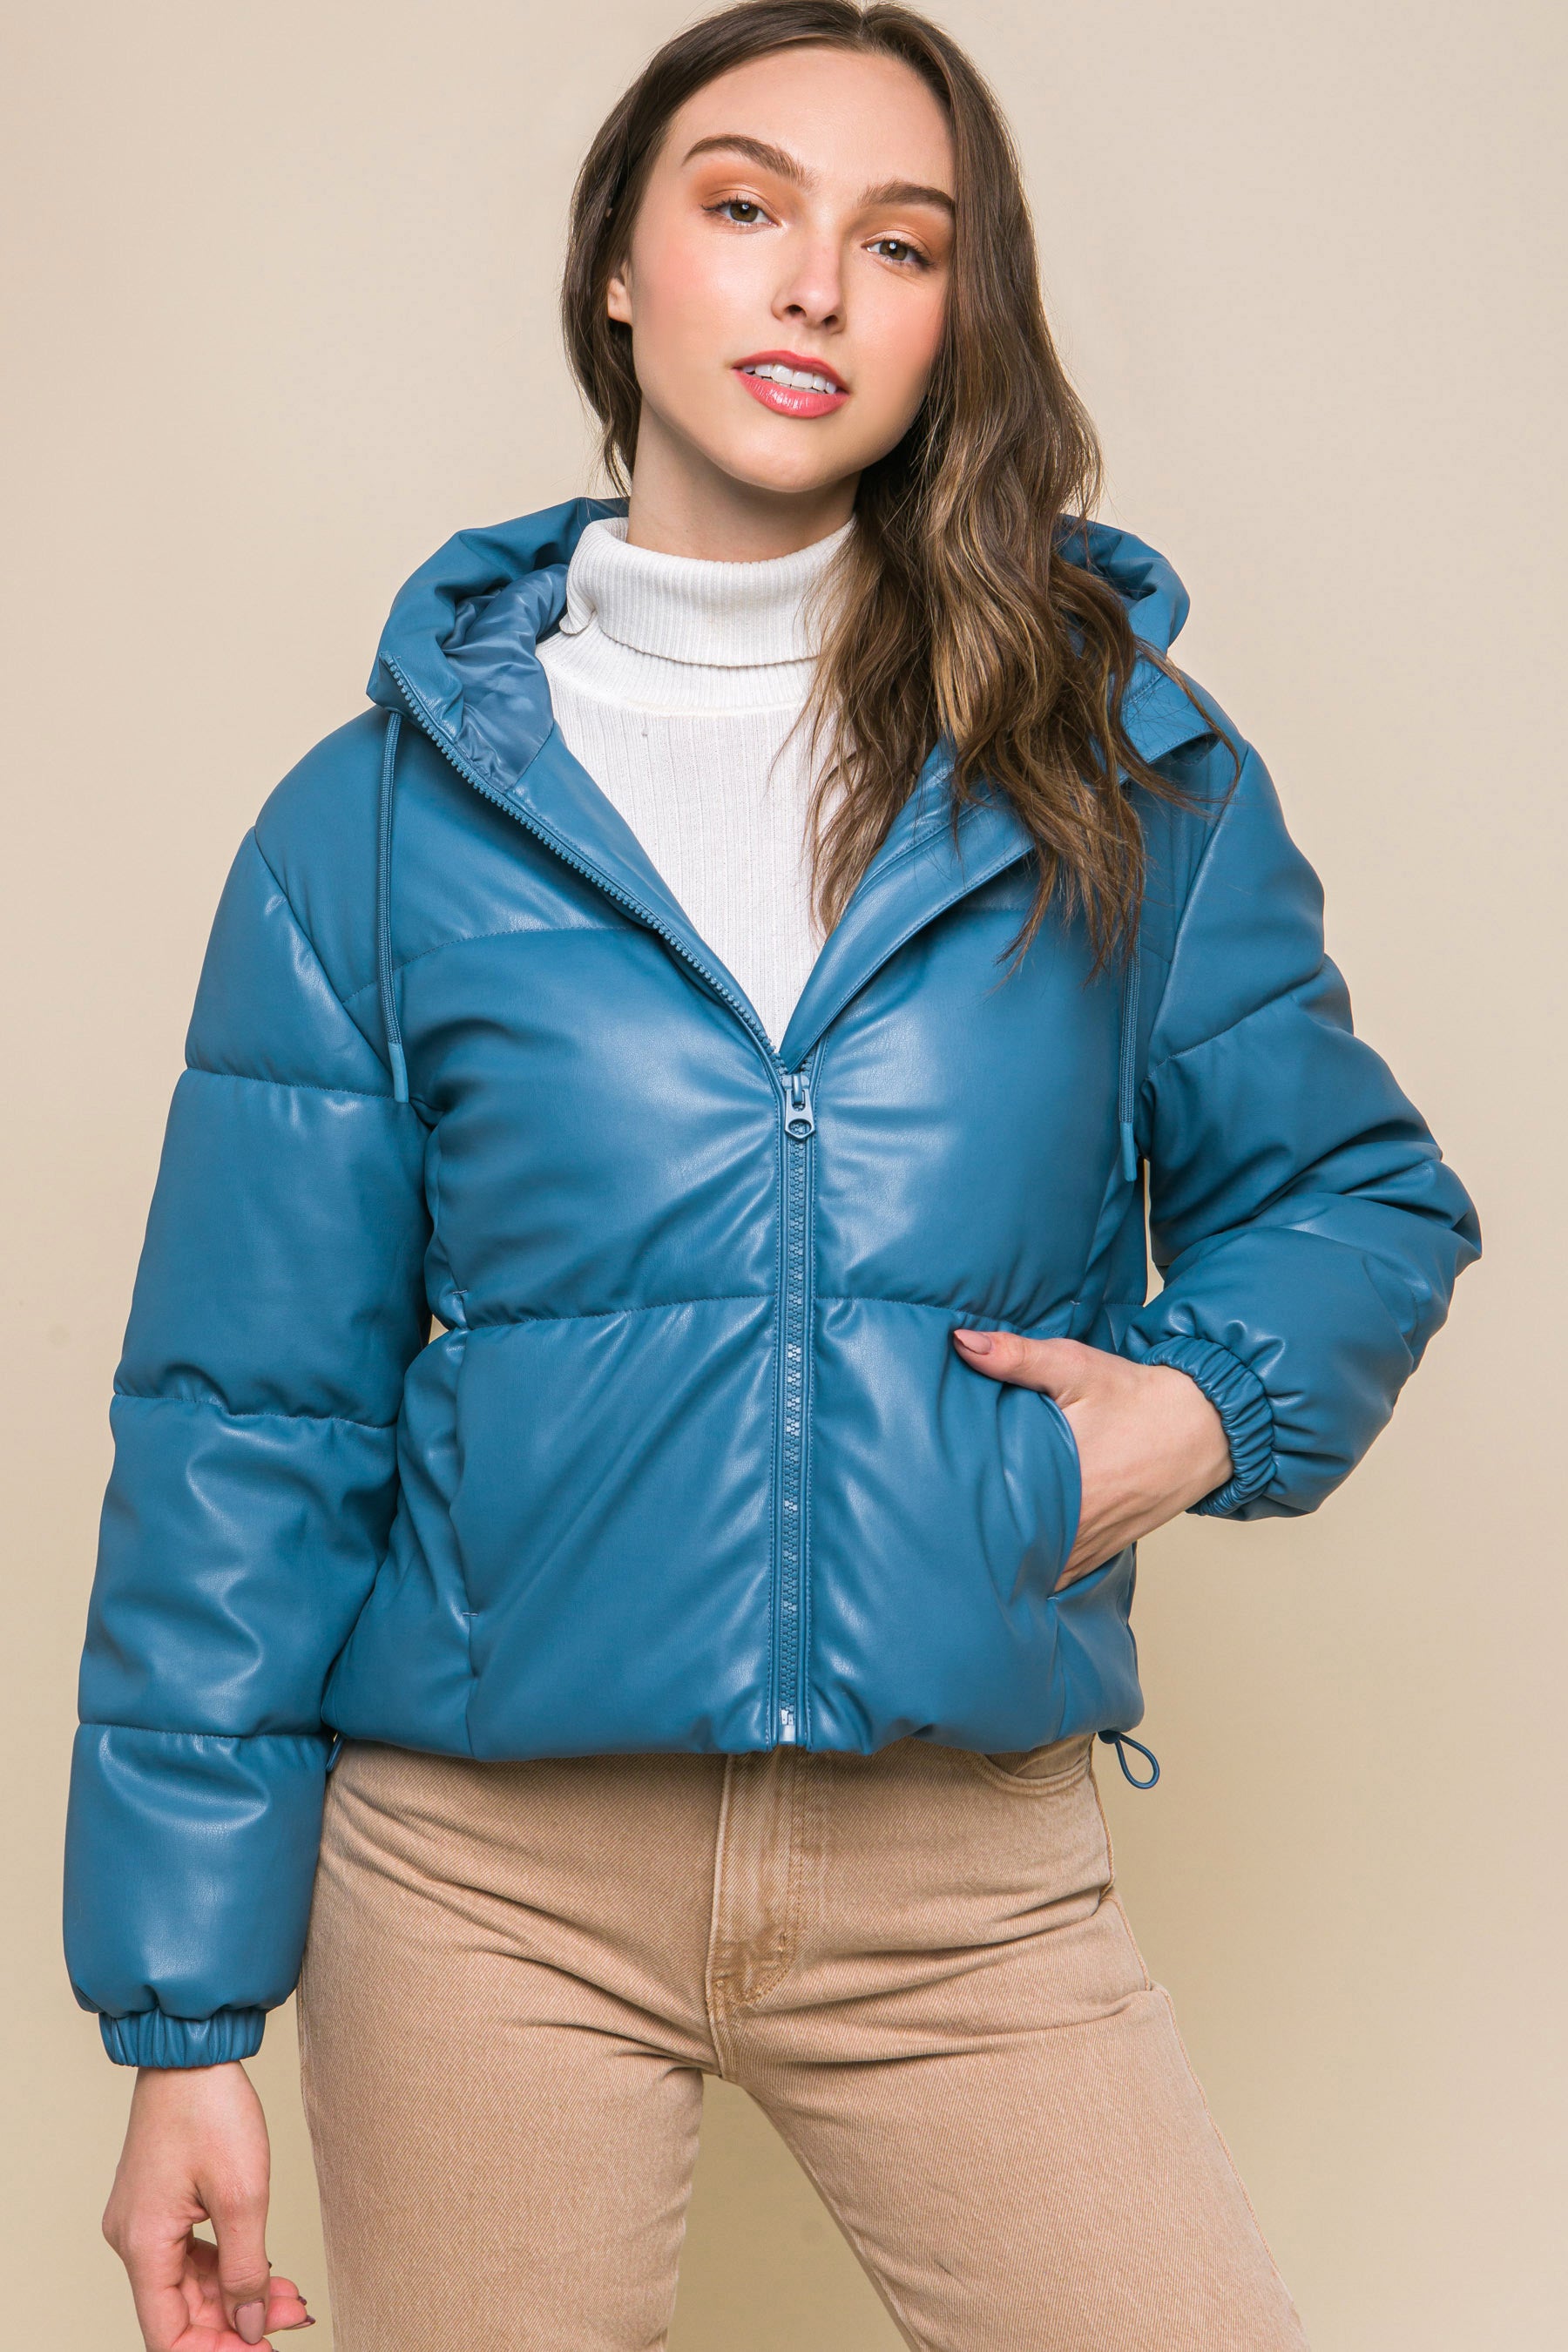 Azure - Pu Faux Leather Zipper Hooded Women's Puffer Jacket - 5 colors - womens coat at TFC&H Co.